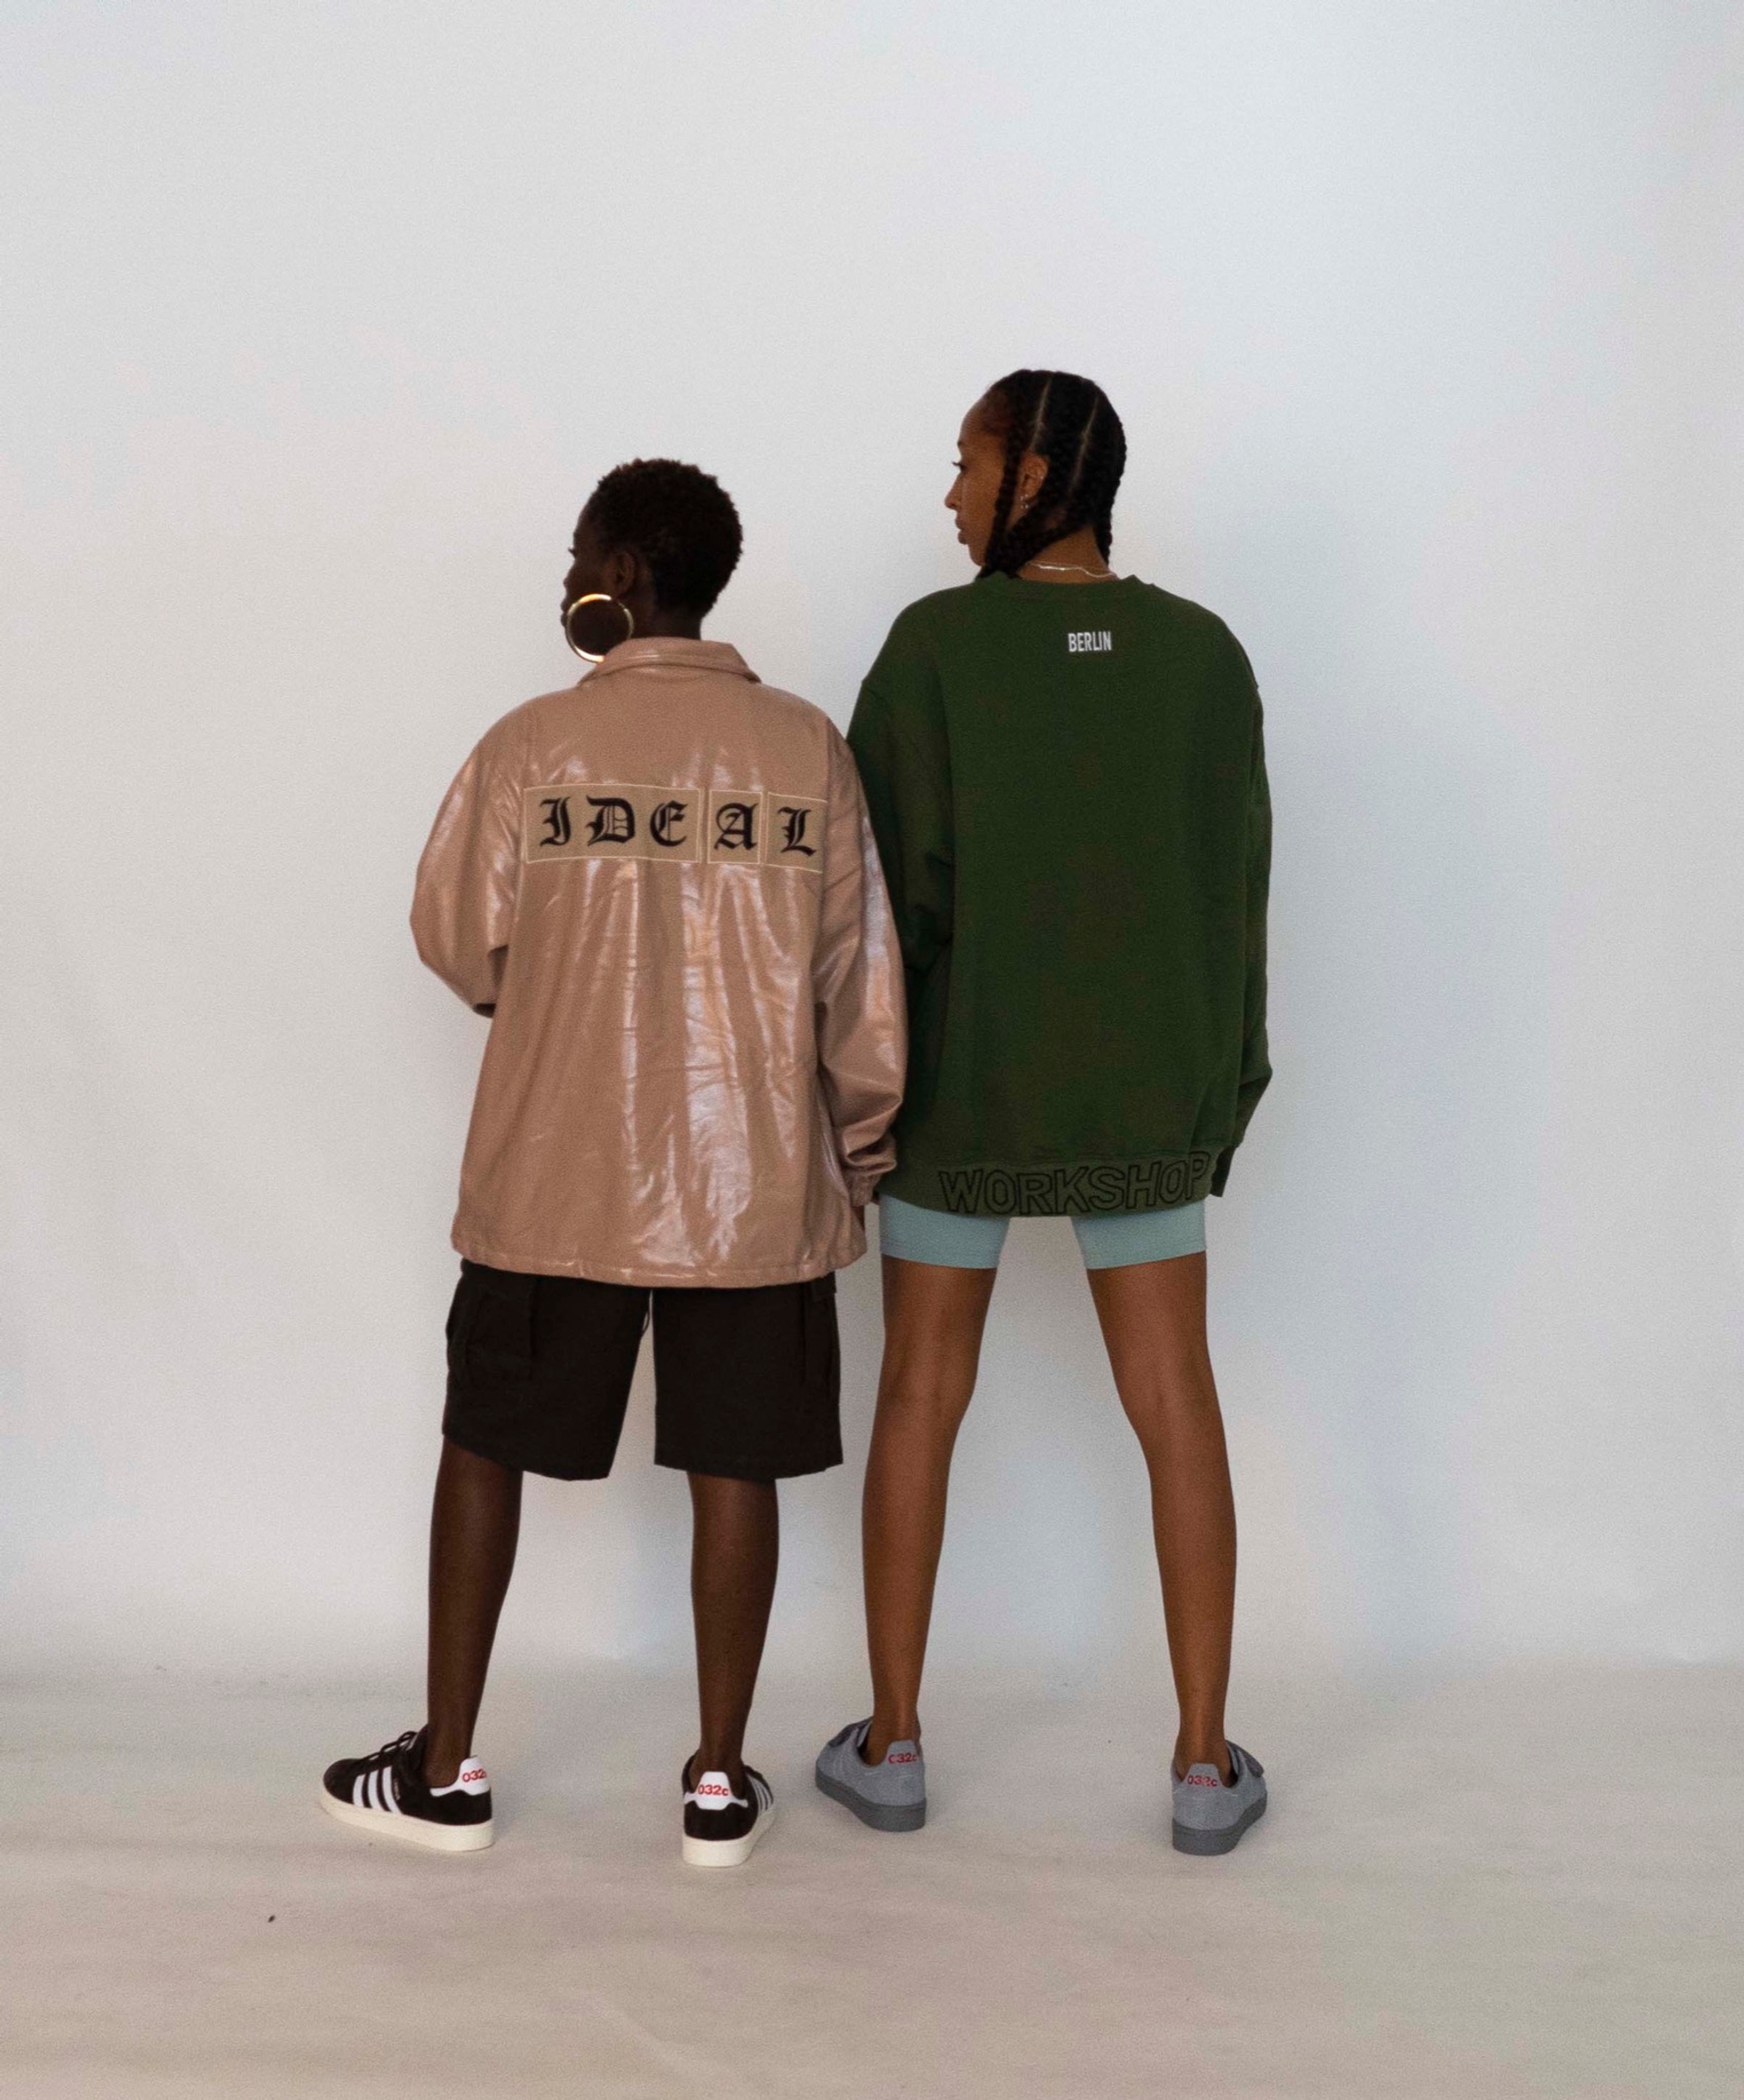 Mariama pairs the 032c LoveSexDreams "IDEAL" Coach Jacket in Beige with Cargo Shorts. Libell wears the "032c Workshop" crewneck in olive and neoprene shorts in mint